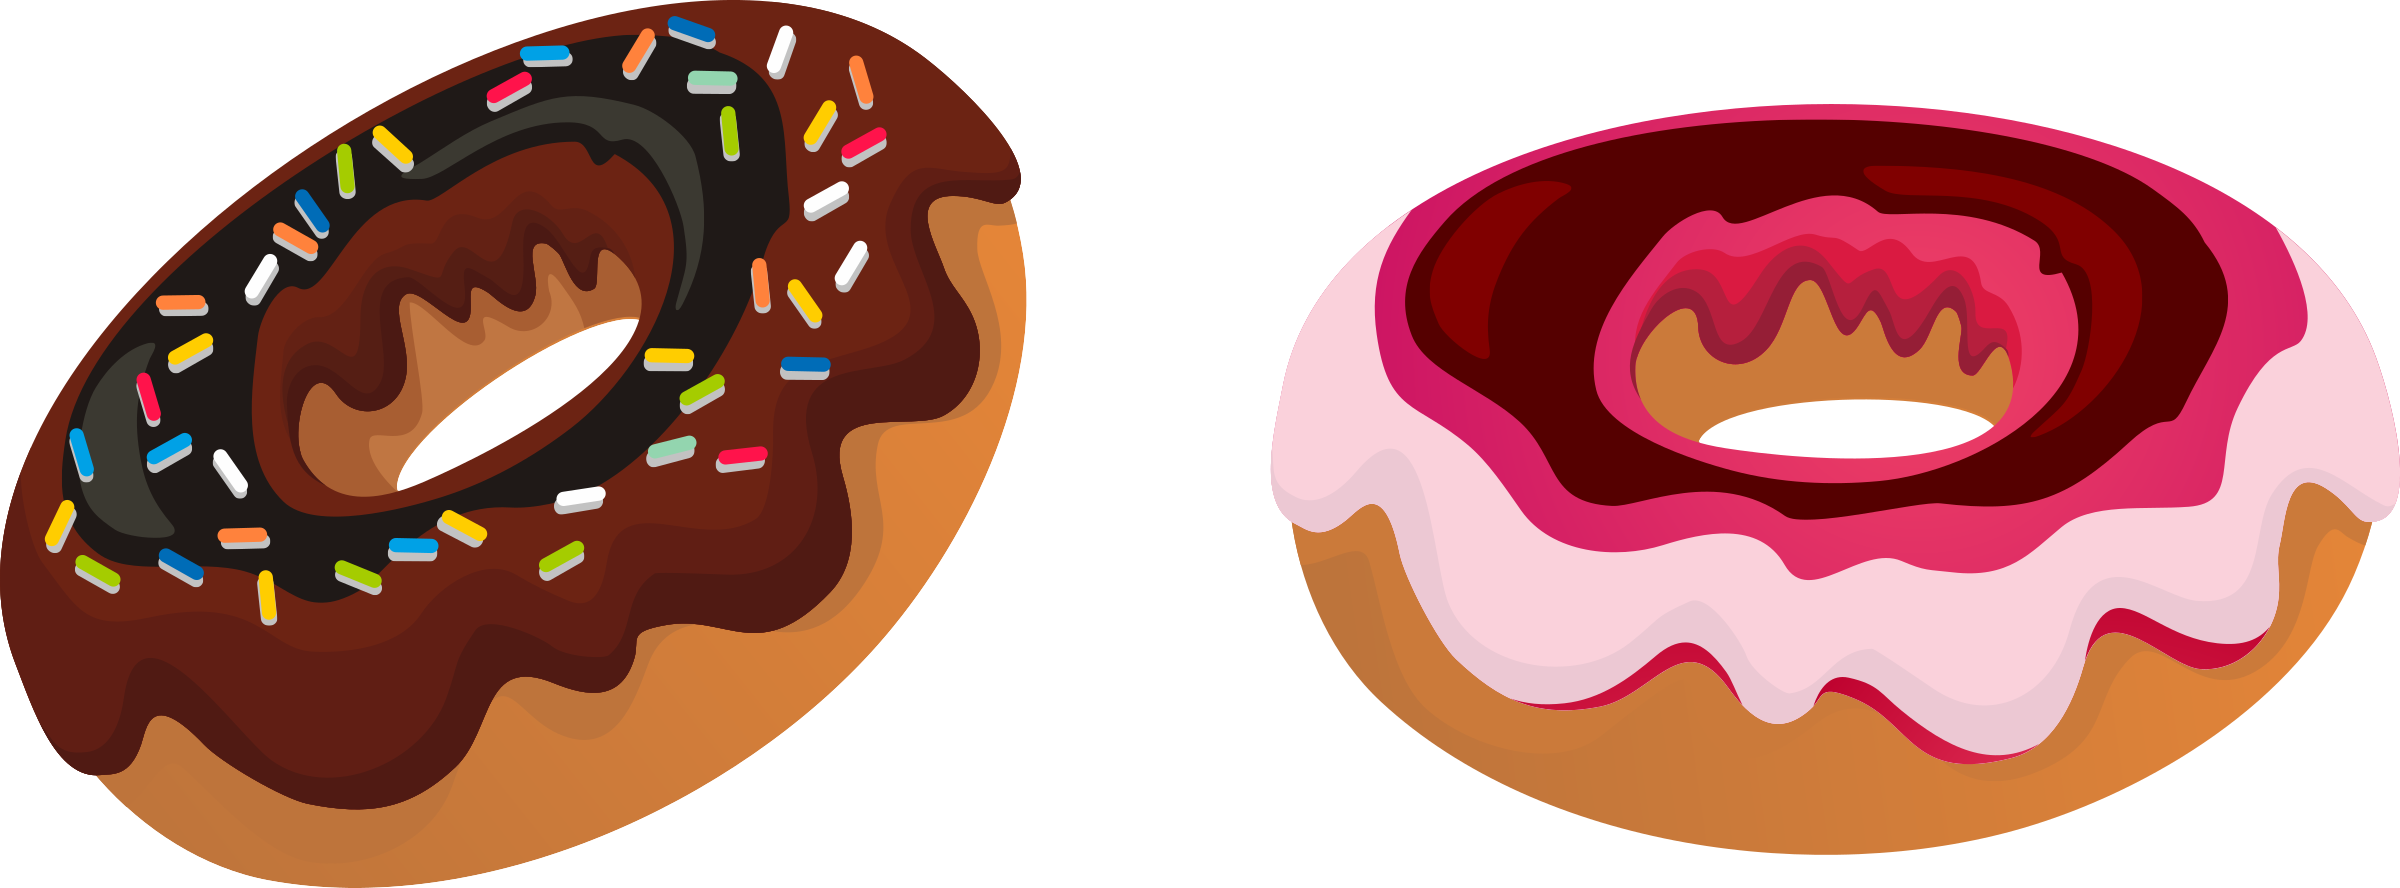 Donut clipart small donut. Donnuts big image png